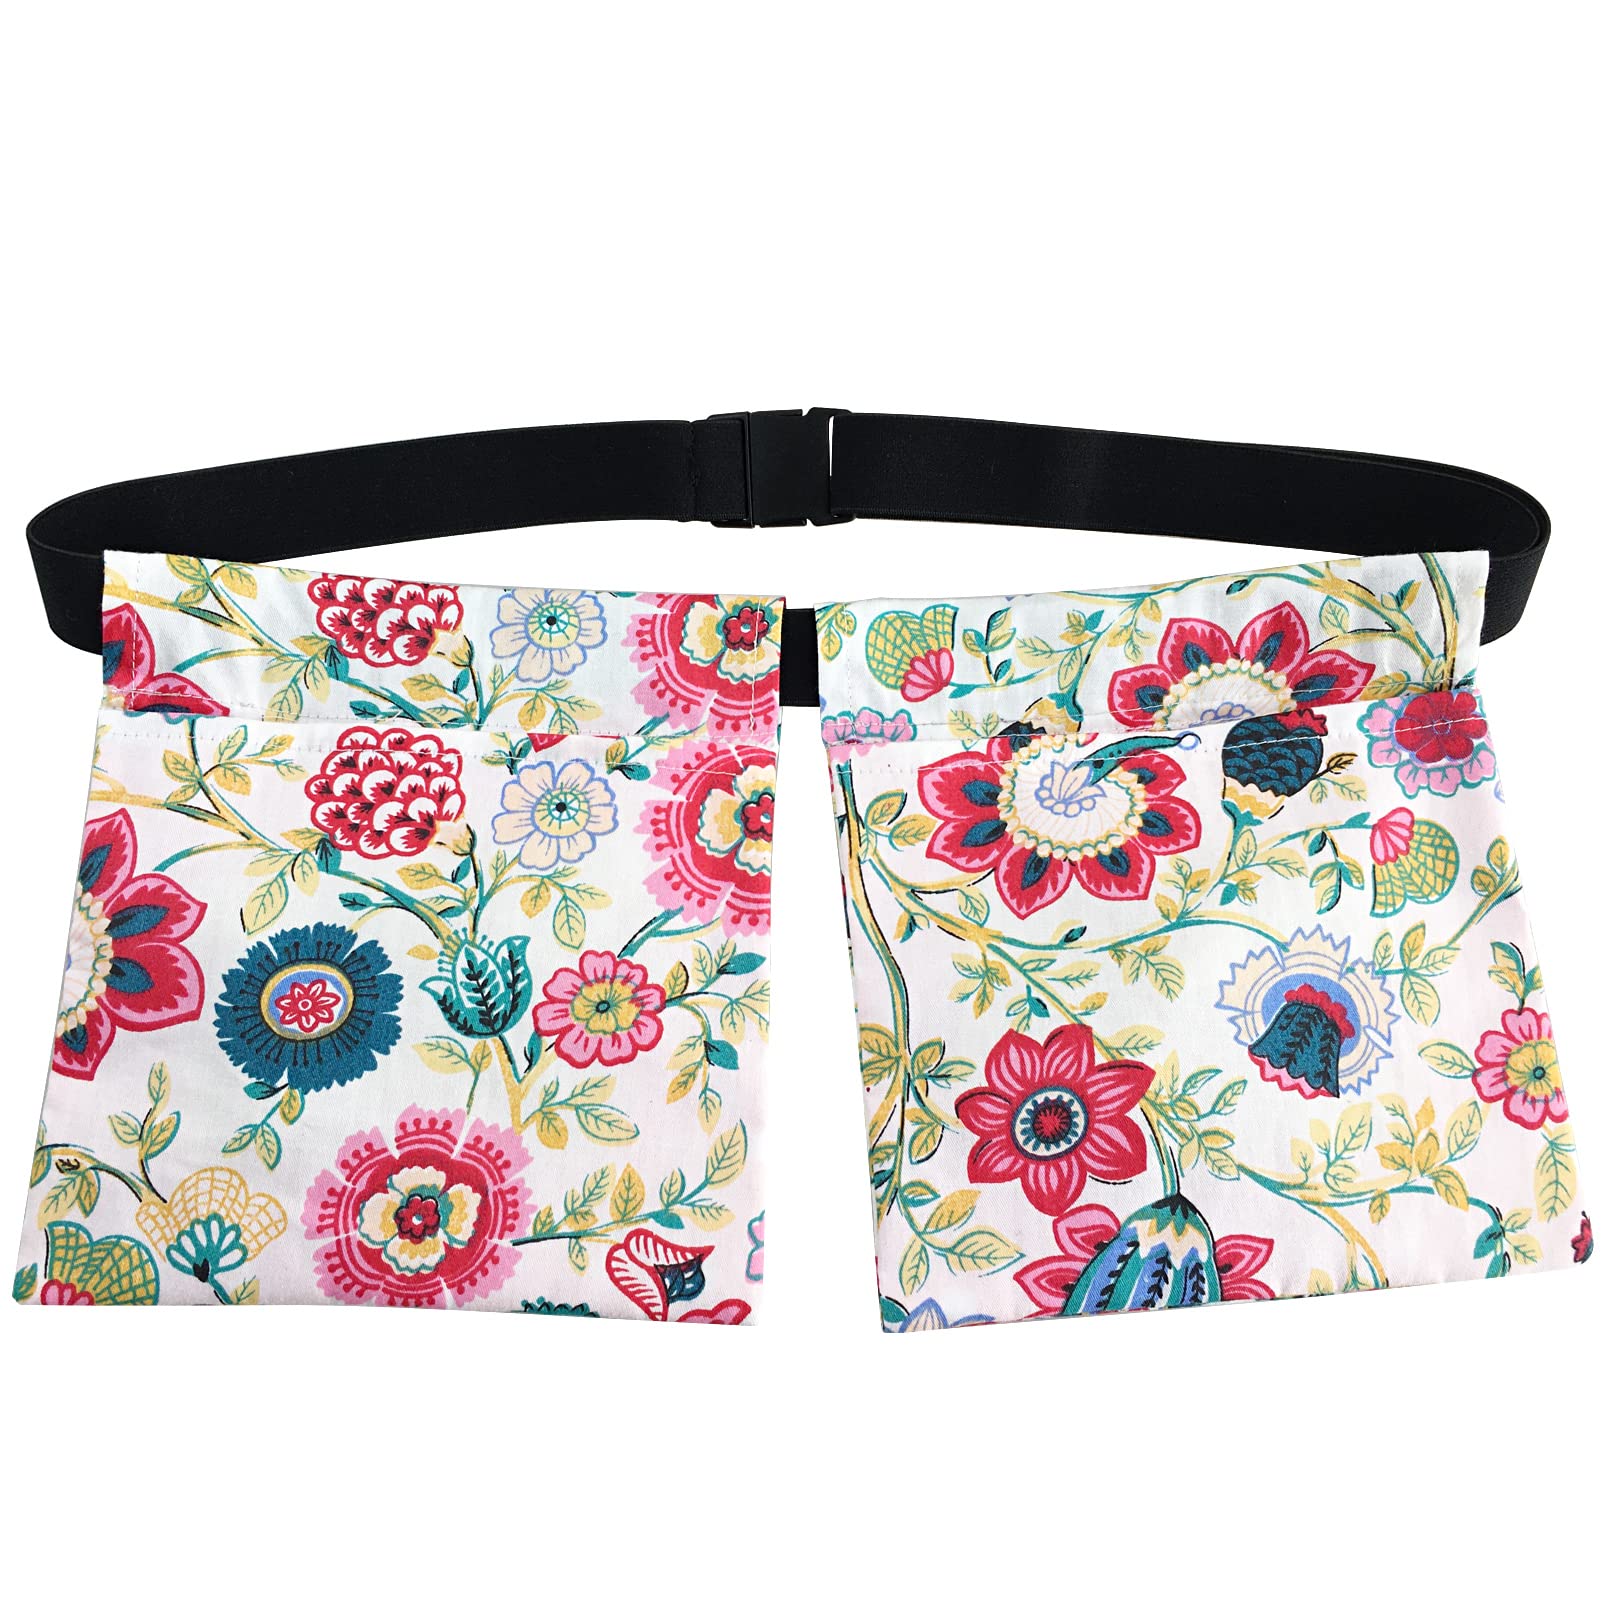 Mastectomy Drain Belt Drainage Pouch Floral Print Holder